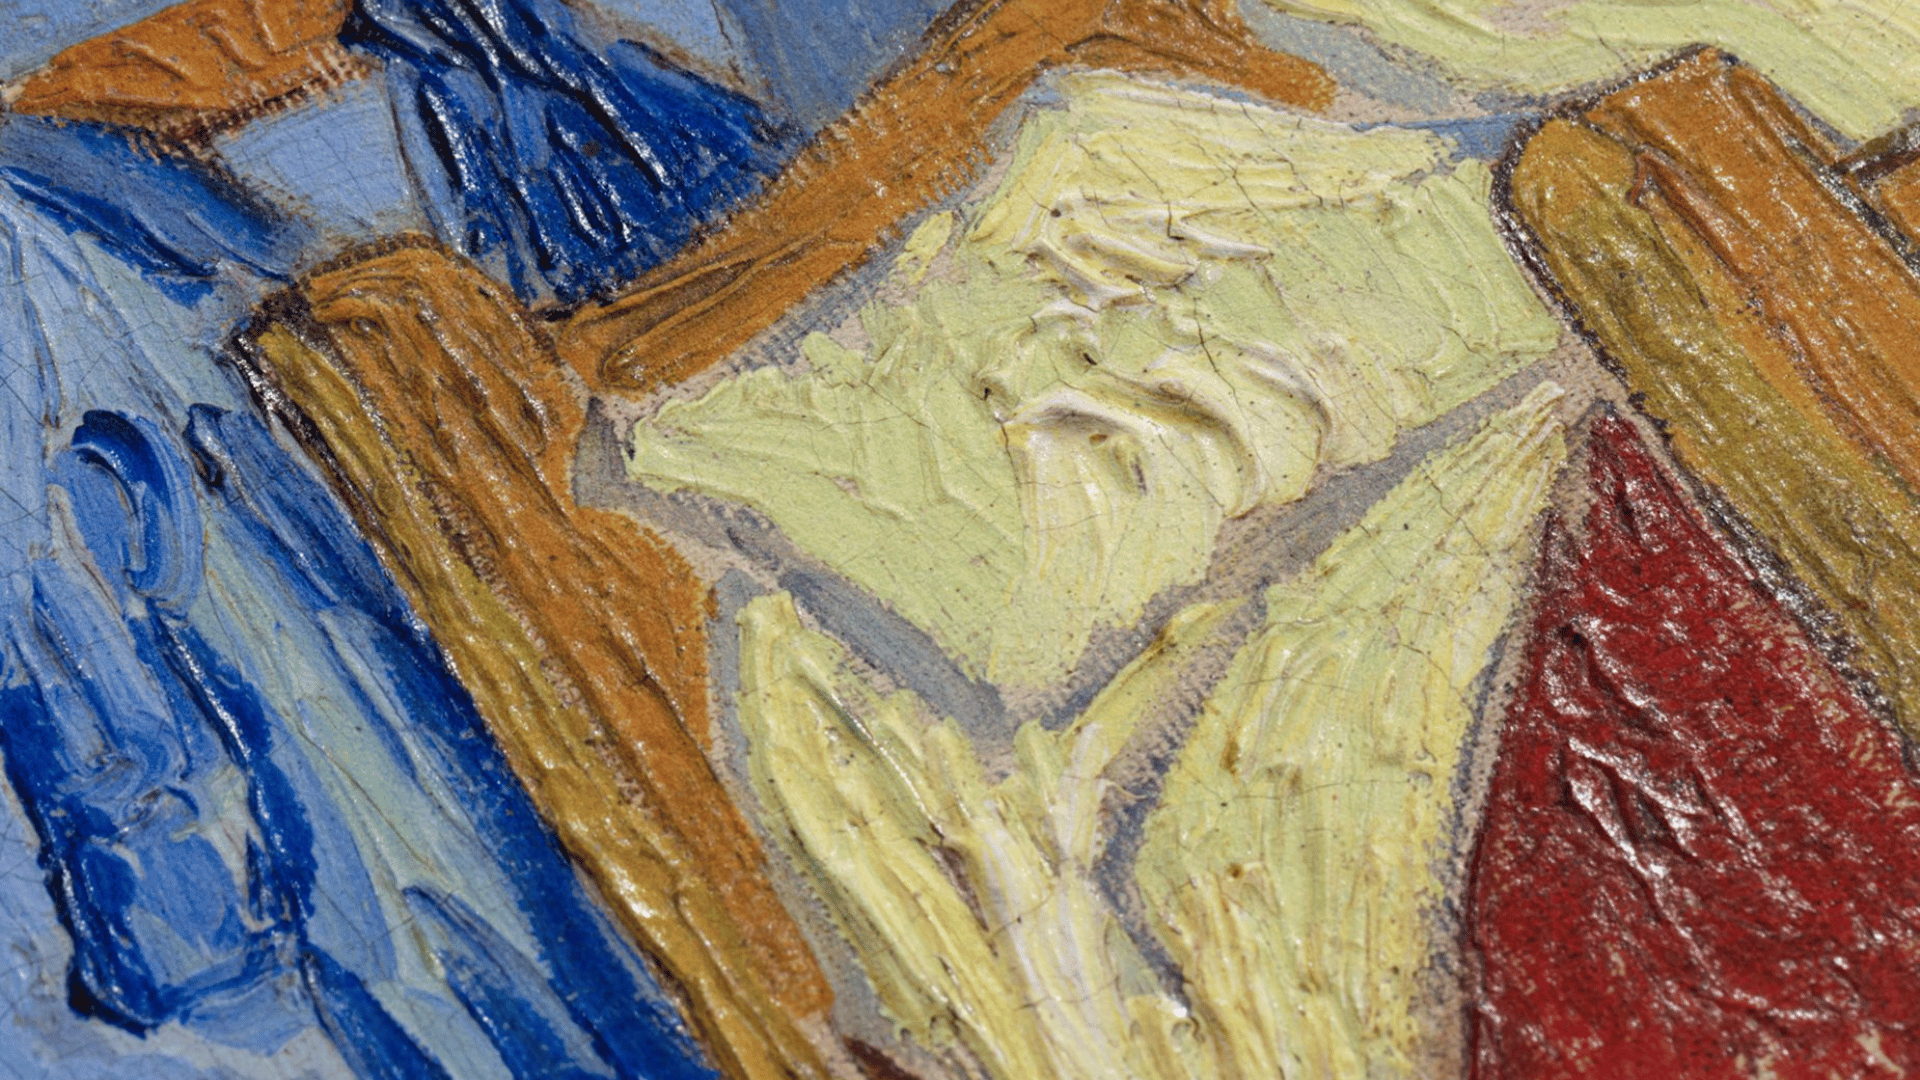 A close-up shot shows the textured surface of Lito Masters' reproduction of Vincent van Gogh's Bedroom in Arles. LITO Masters